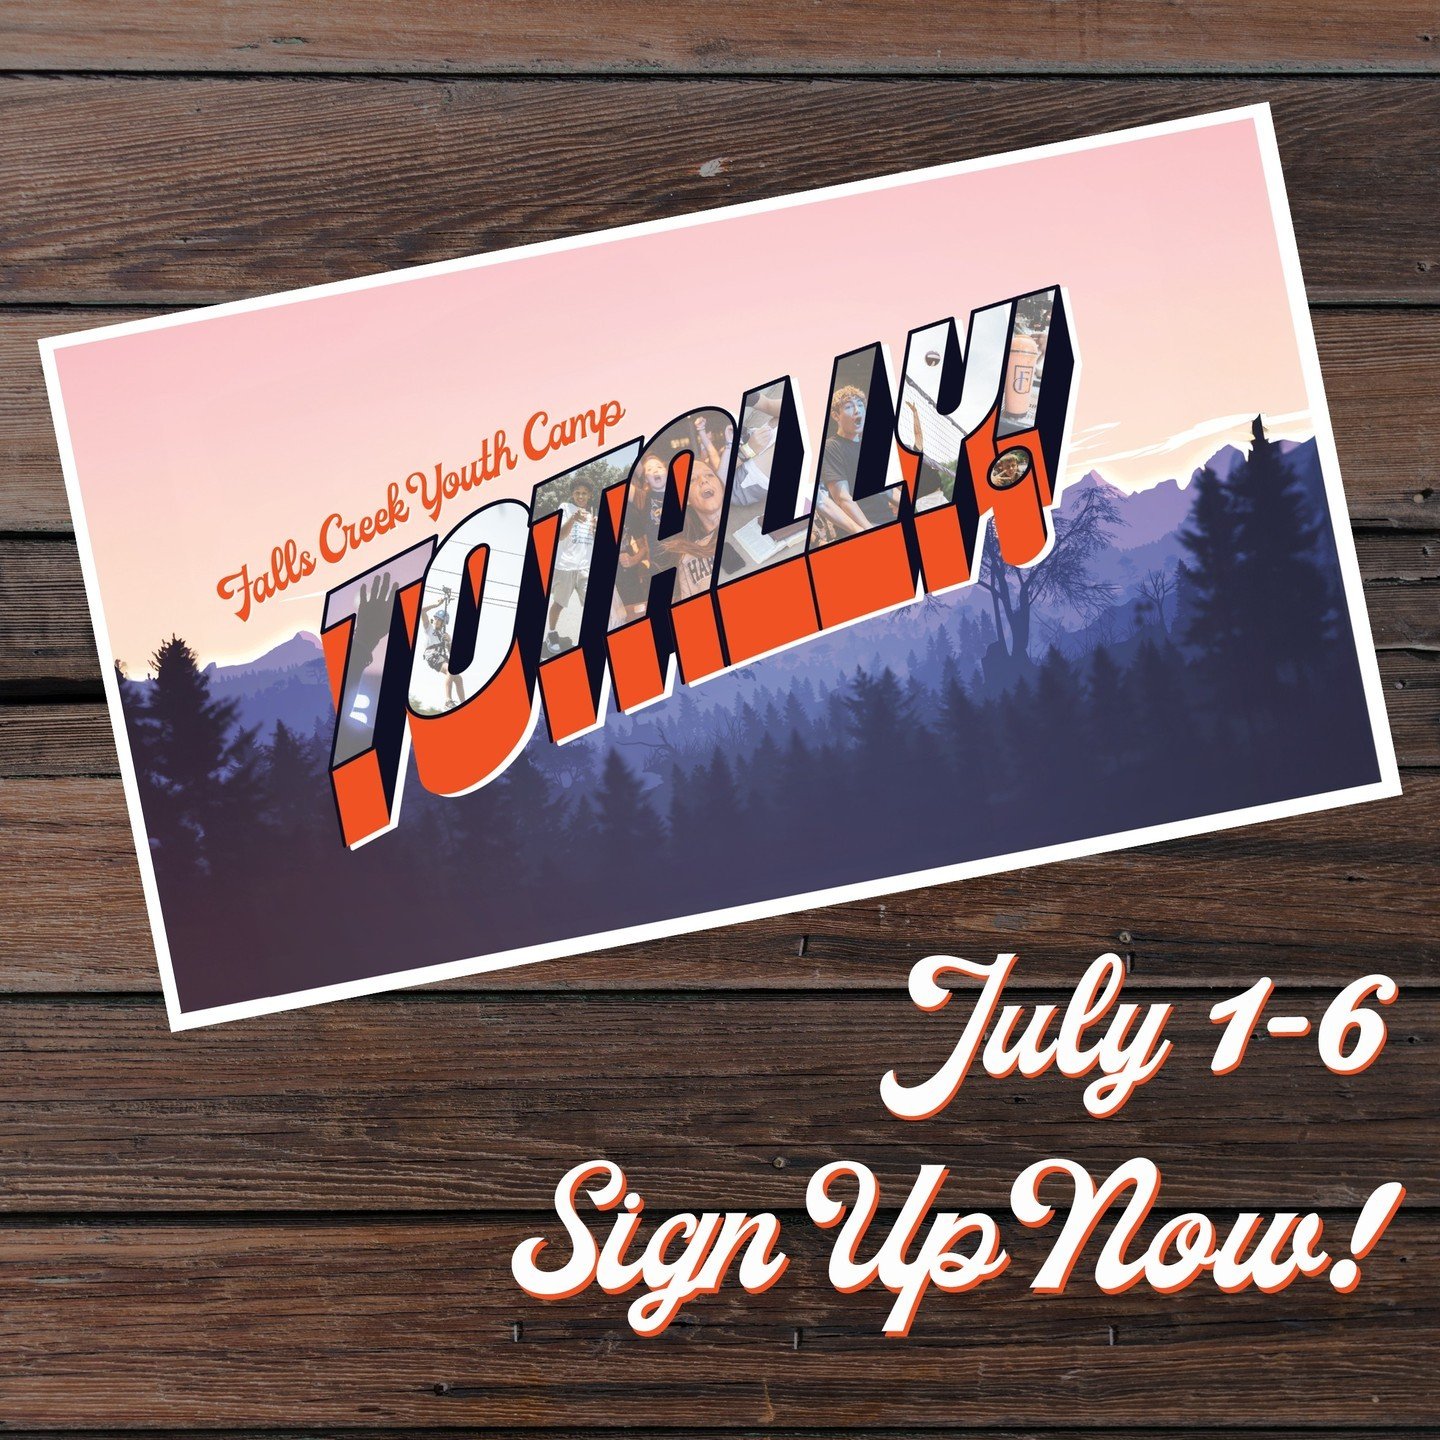 Have you signed up yet for Falls Creek this summer? The cost to attend is now only $50 per student! Visit aspenpark.church/events for the registration link.